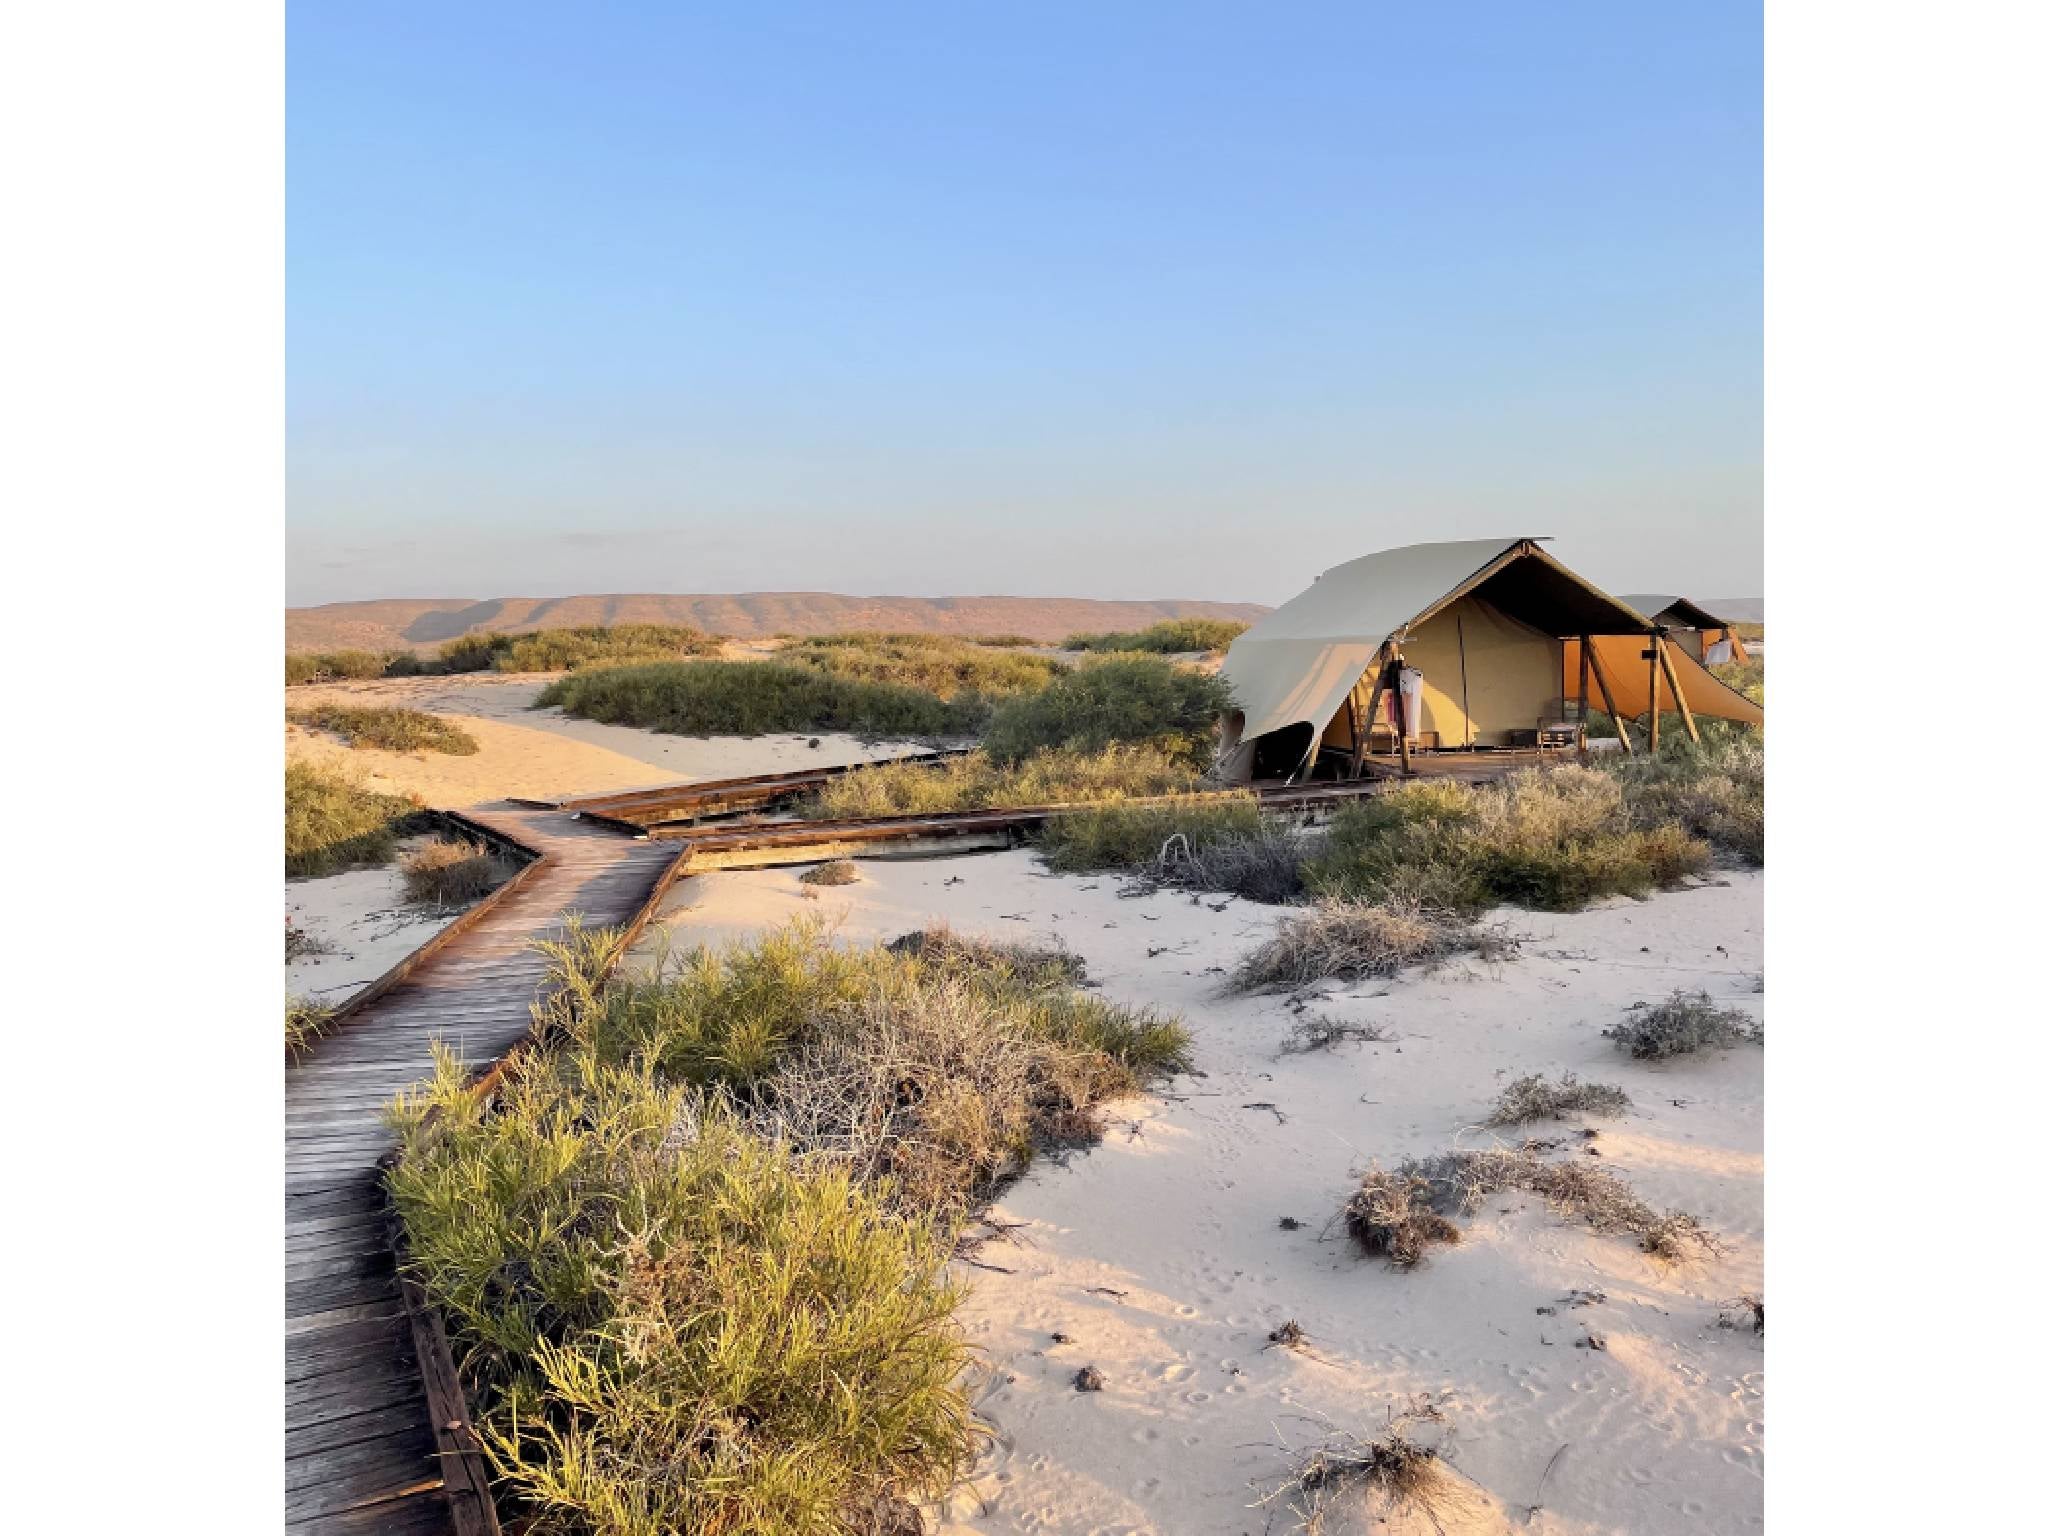 Eco-camp Sal Salis boasts tents hidden in the dunes complete with ensuite bathrooms